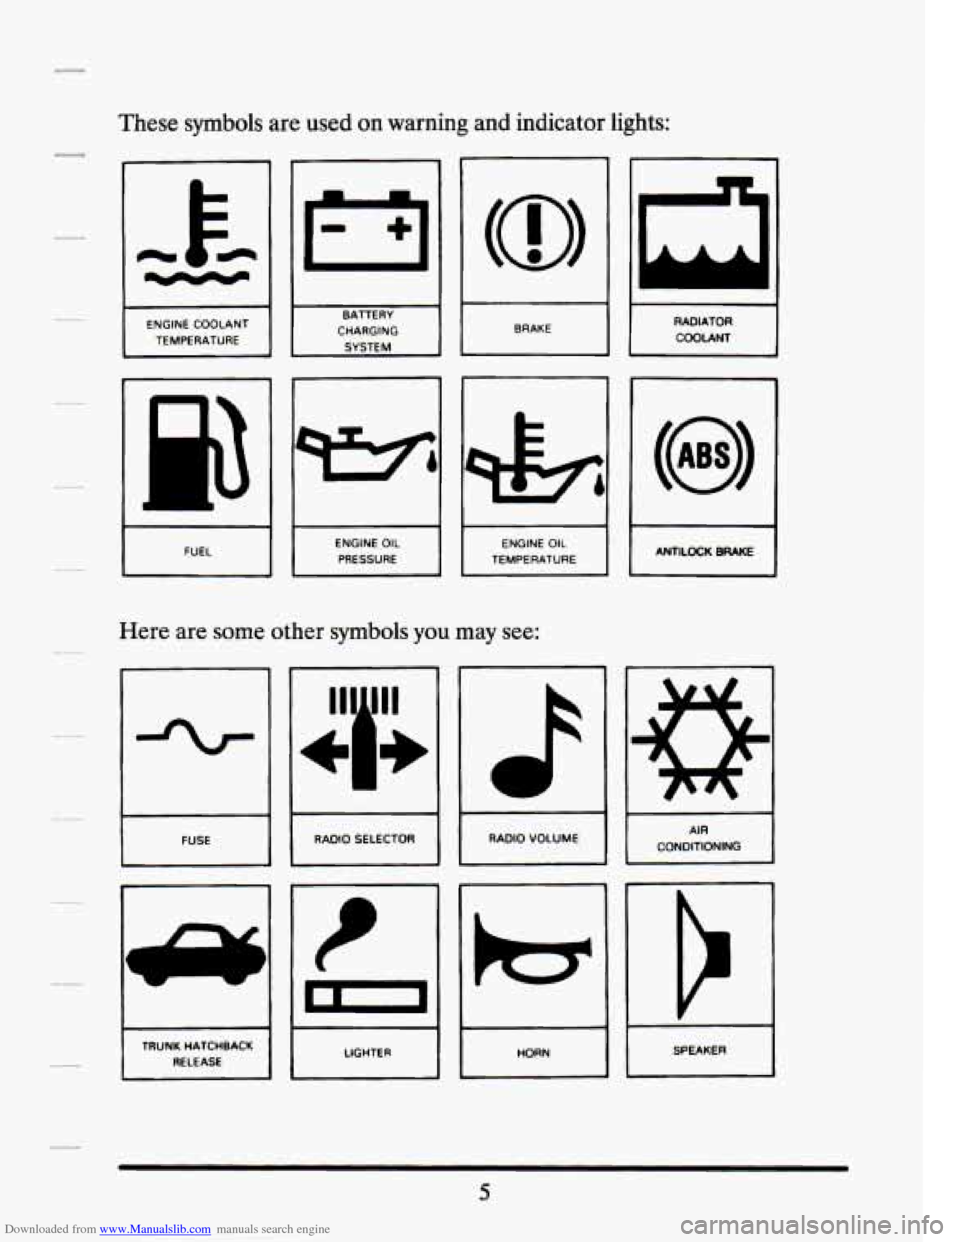 CADILLAC SEVILLE 1994 4.G Owners Manual Downloaded from www.Manualslib.com manuals search engine These  symbols  are  used on warning  and  indicator  lights: 
1-1 
I I BRAKE I I 
RADIATOR 
COOLANT 
I 
ENGINE  COOLANT  TEMPERATURE I CHARGIN